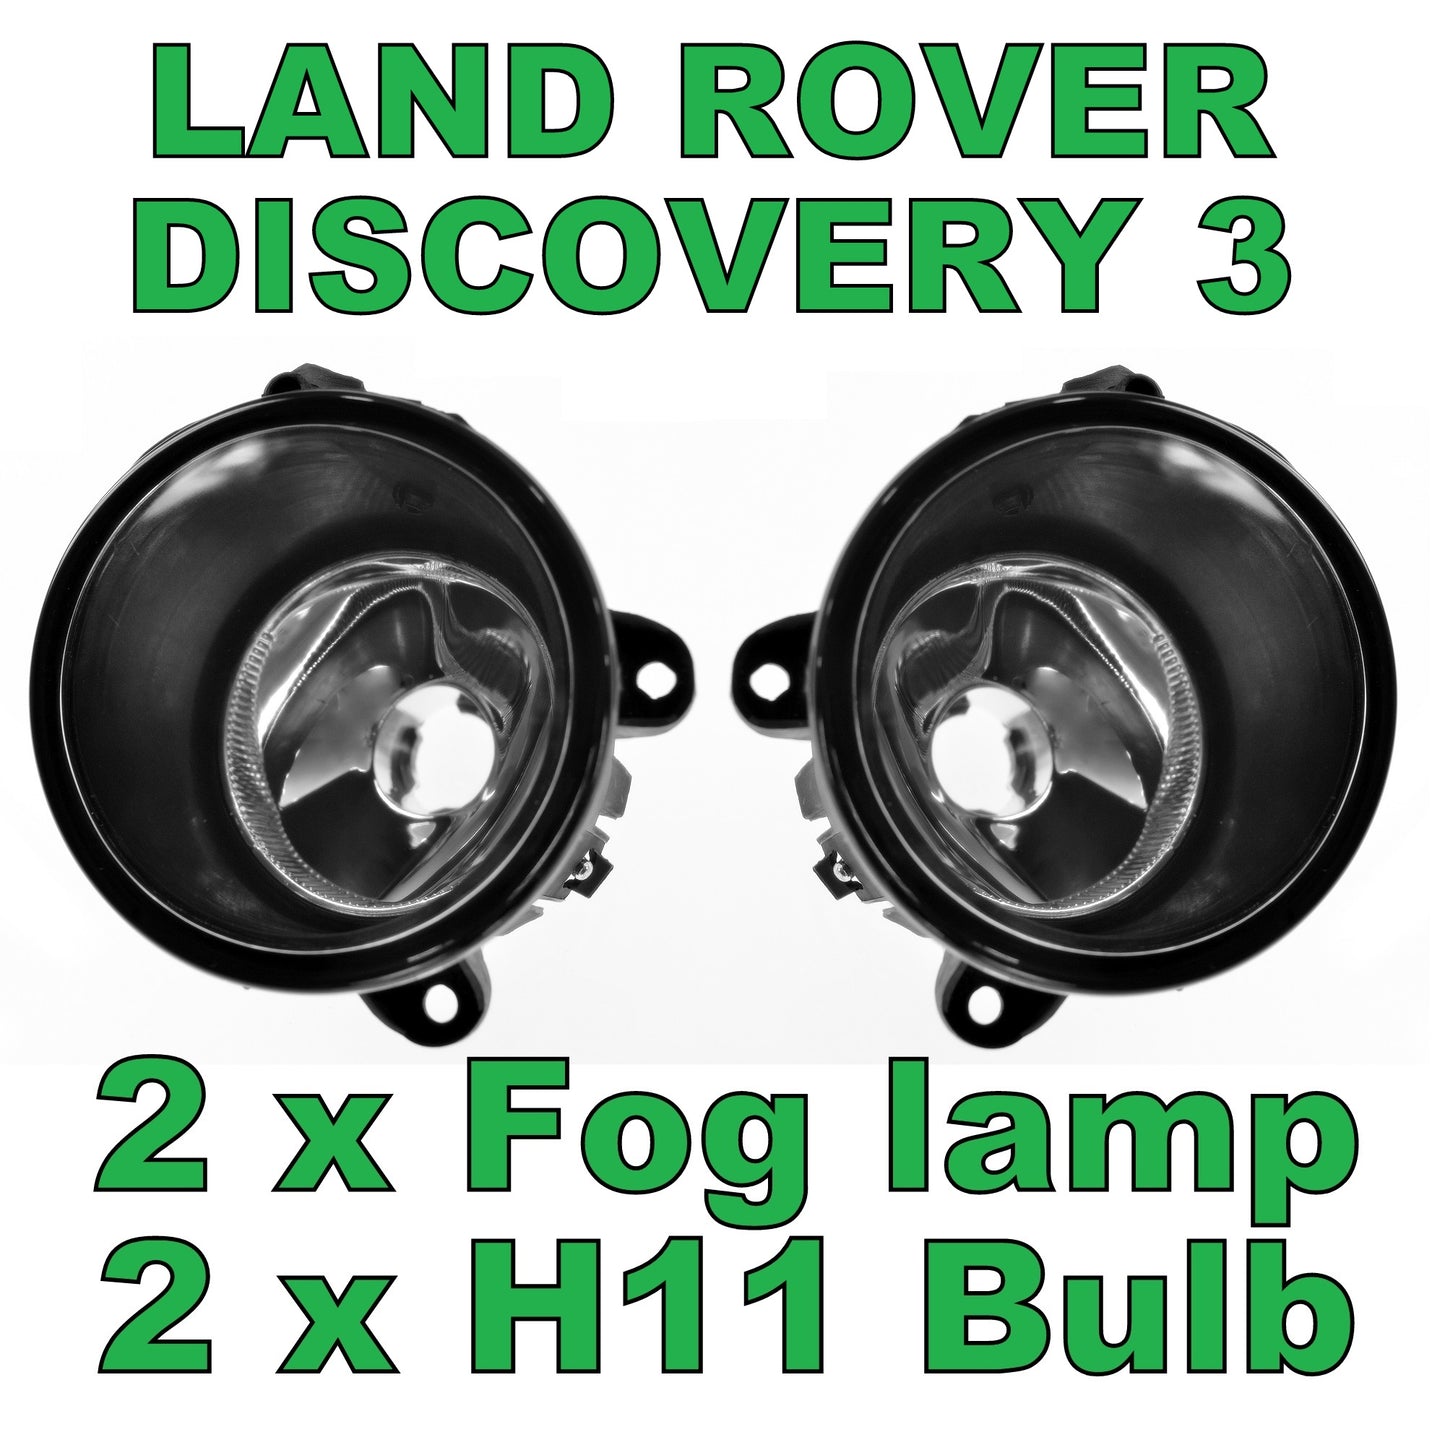 Front Bumper Fog Lights for Land Rover Discovery 3 - PAIR